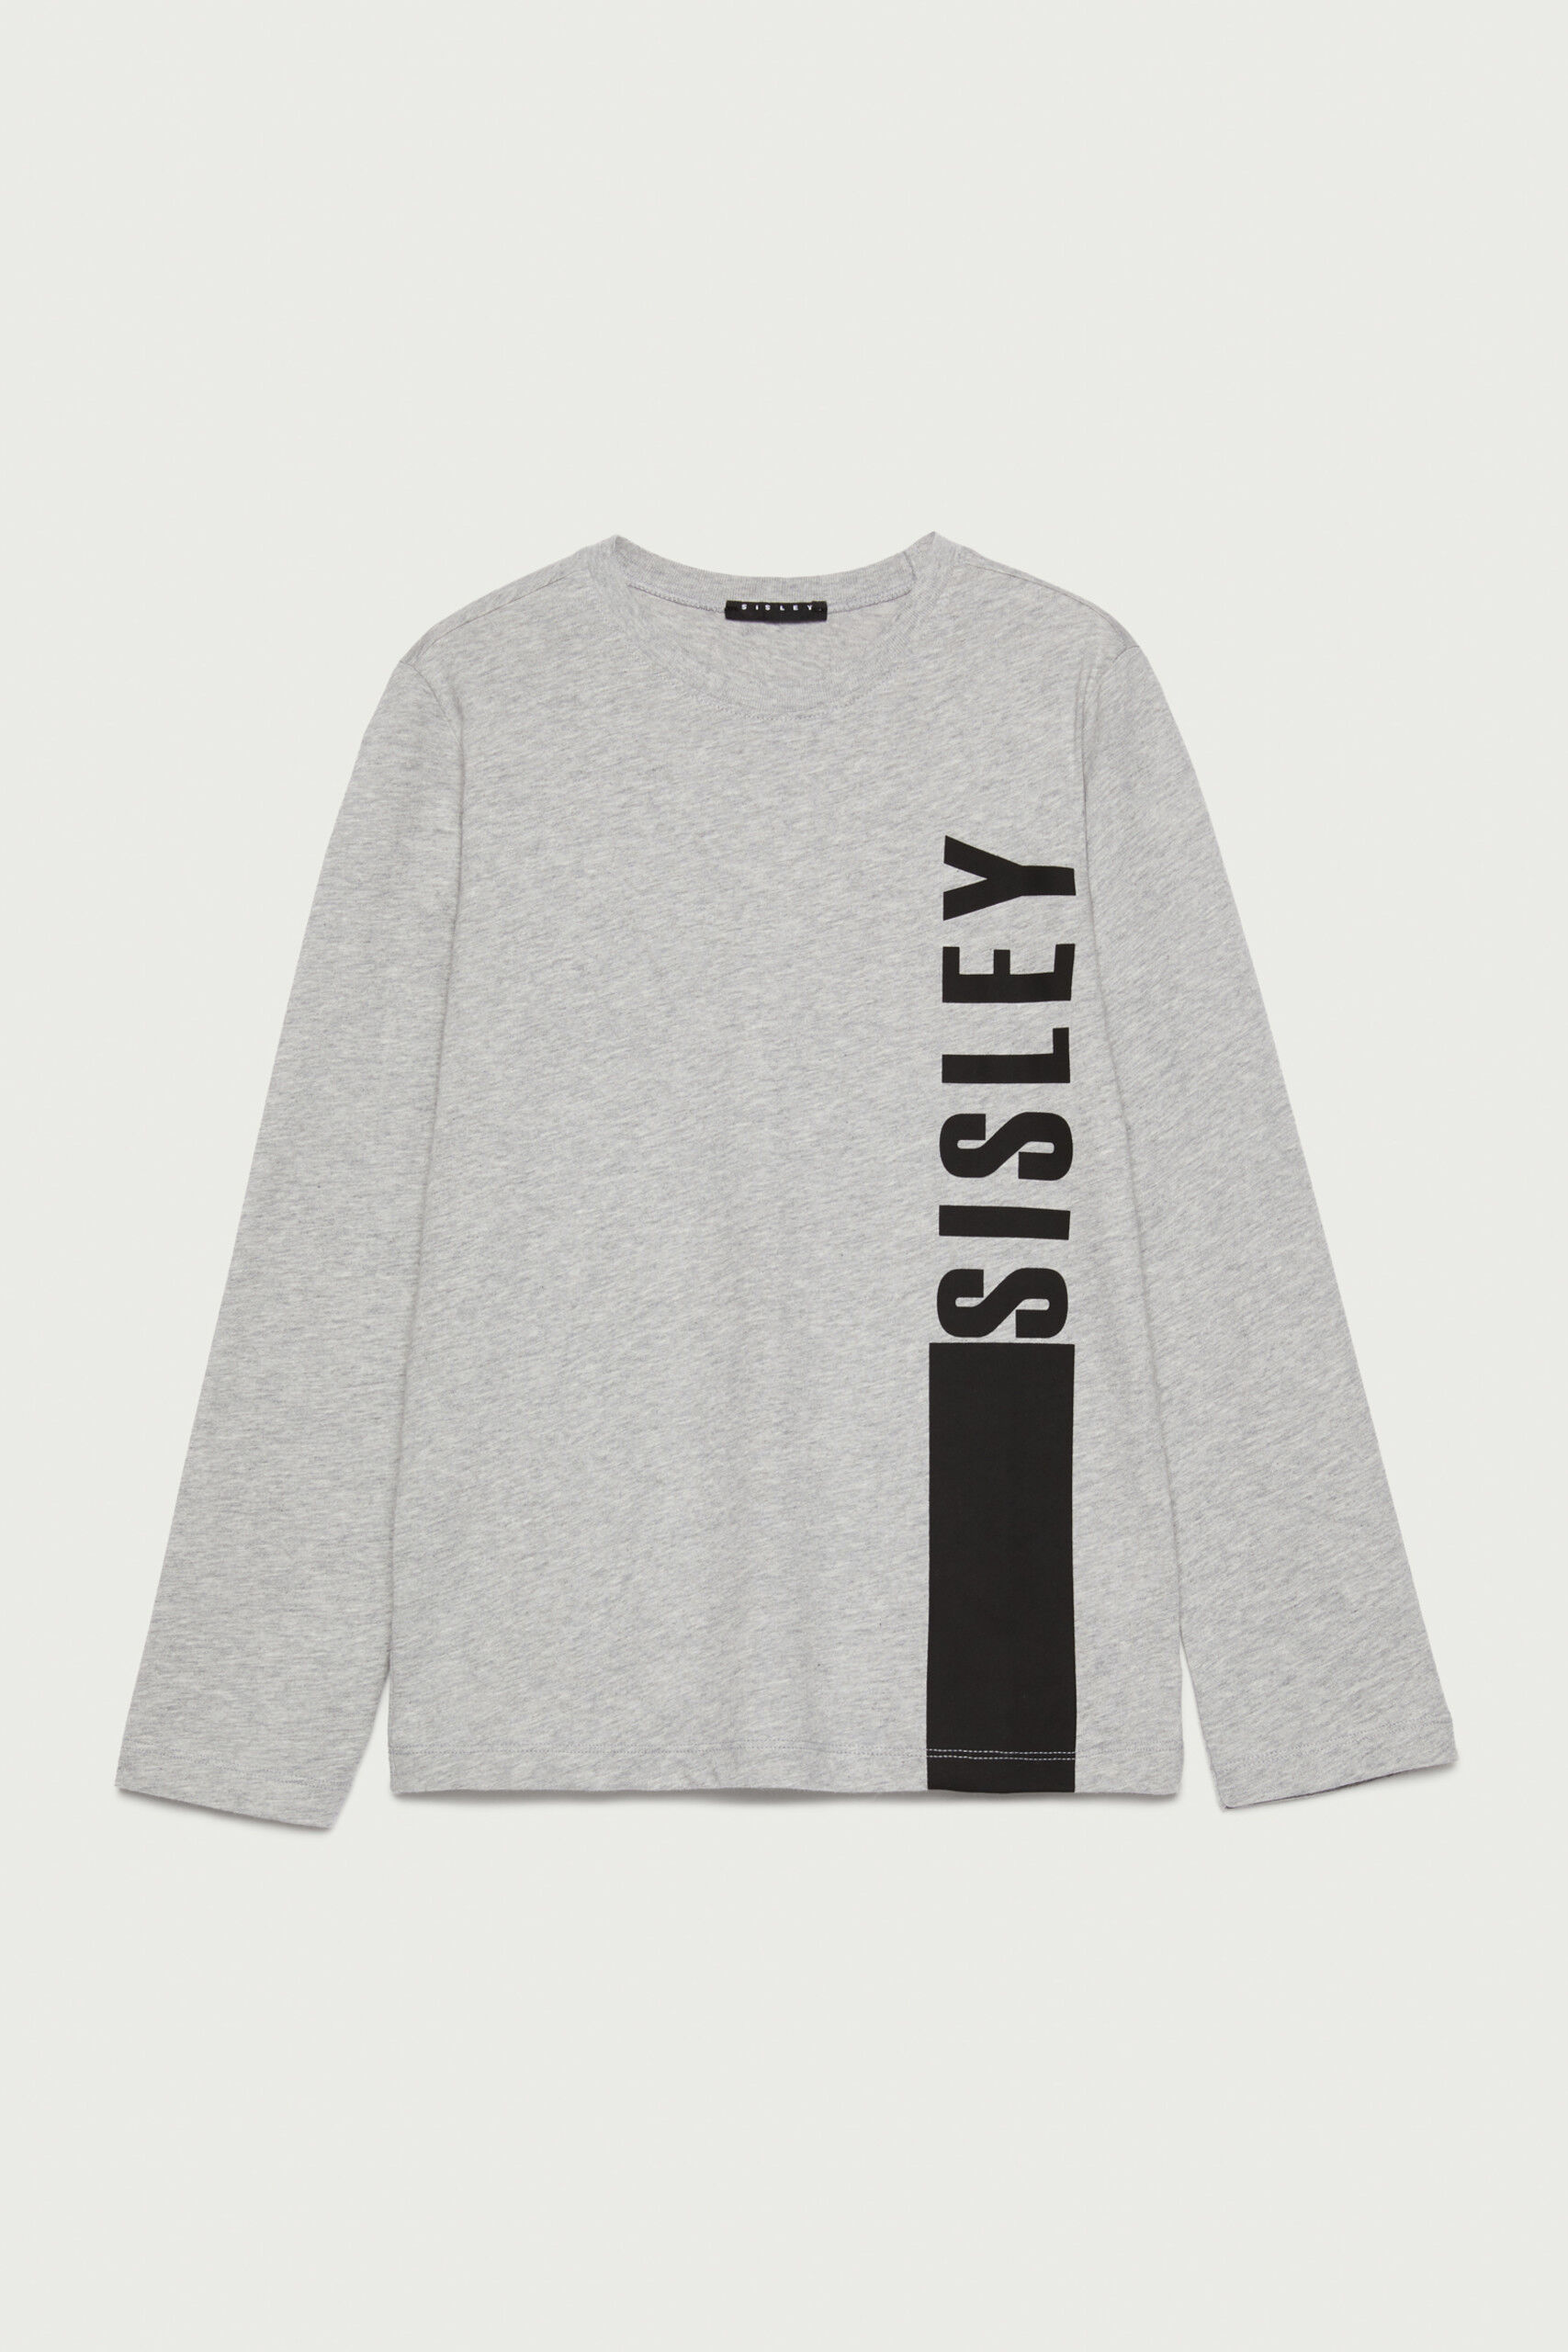 Boys' T-shirts and Tops Collection 2021 | Sisley Young